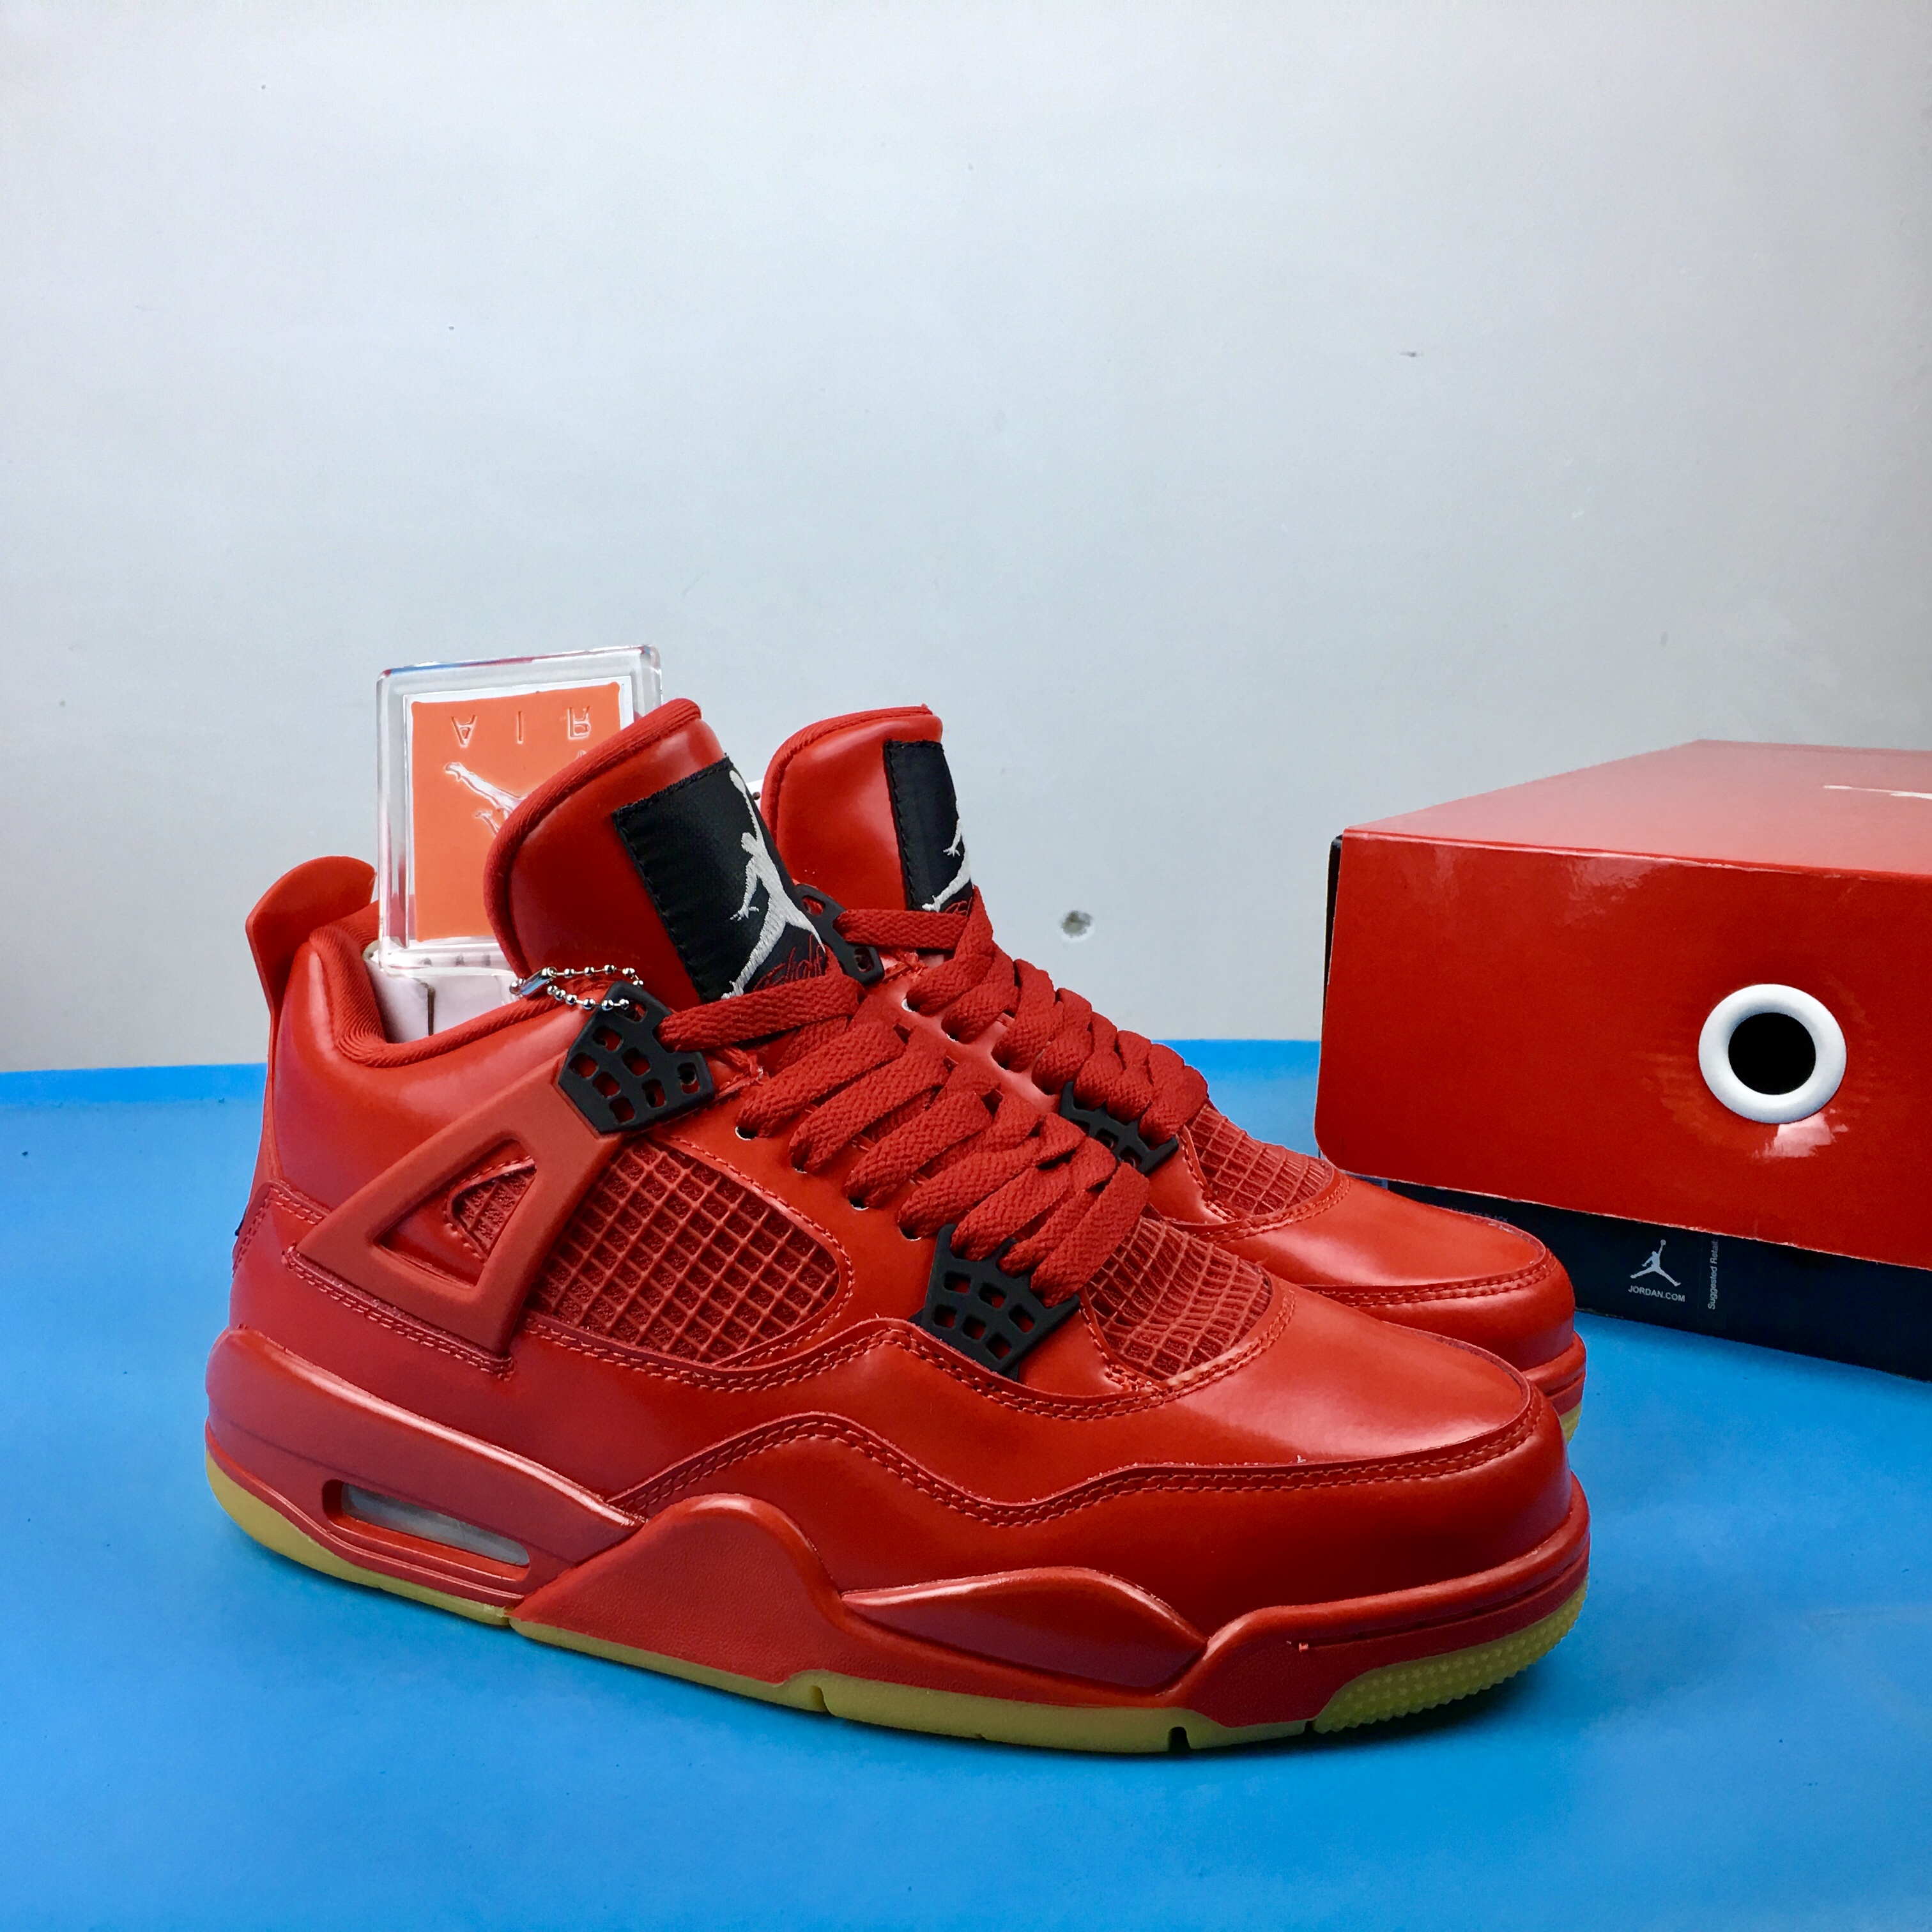 Air Jordan 4 Singles Day All Red Gum Sole Shoes